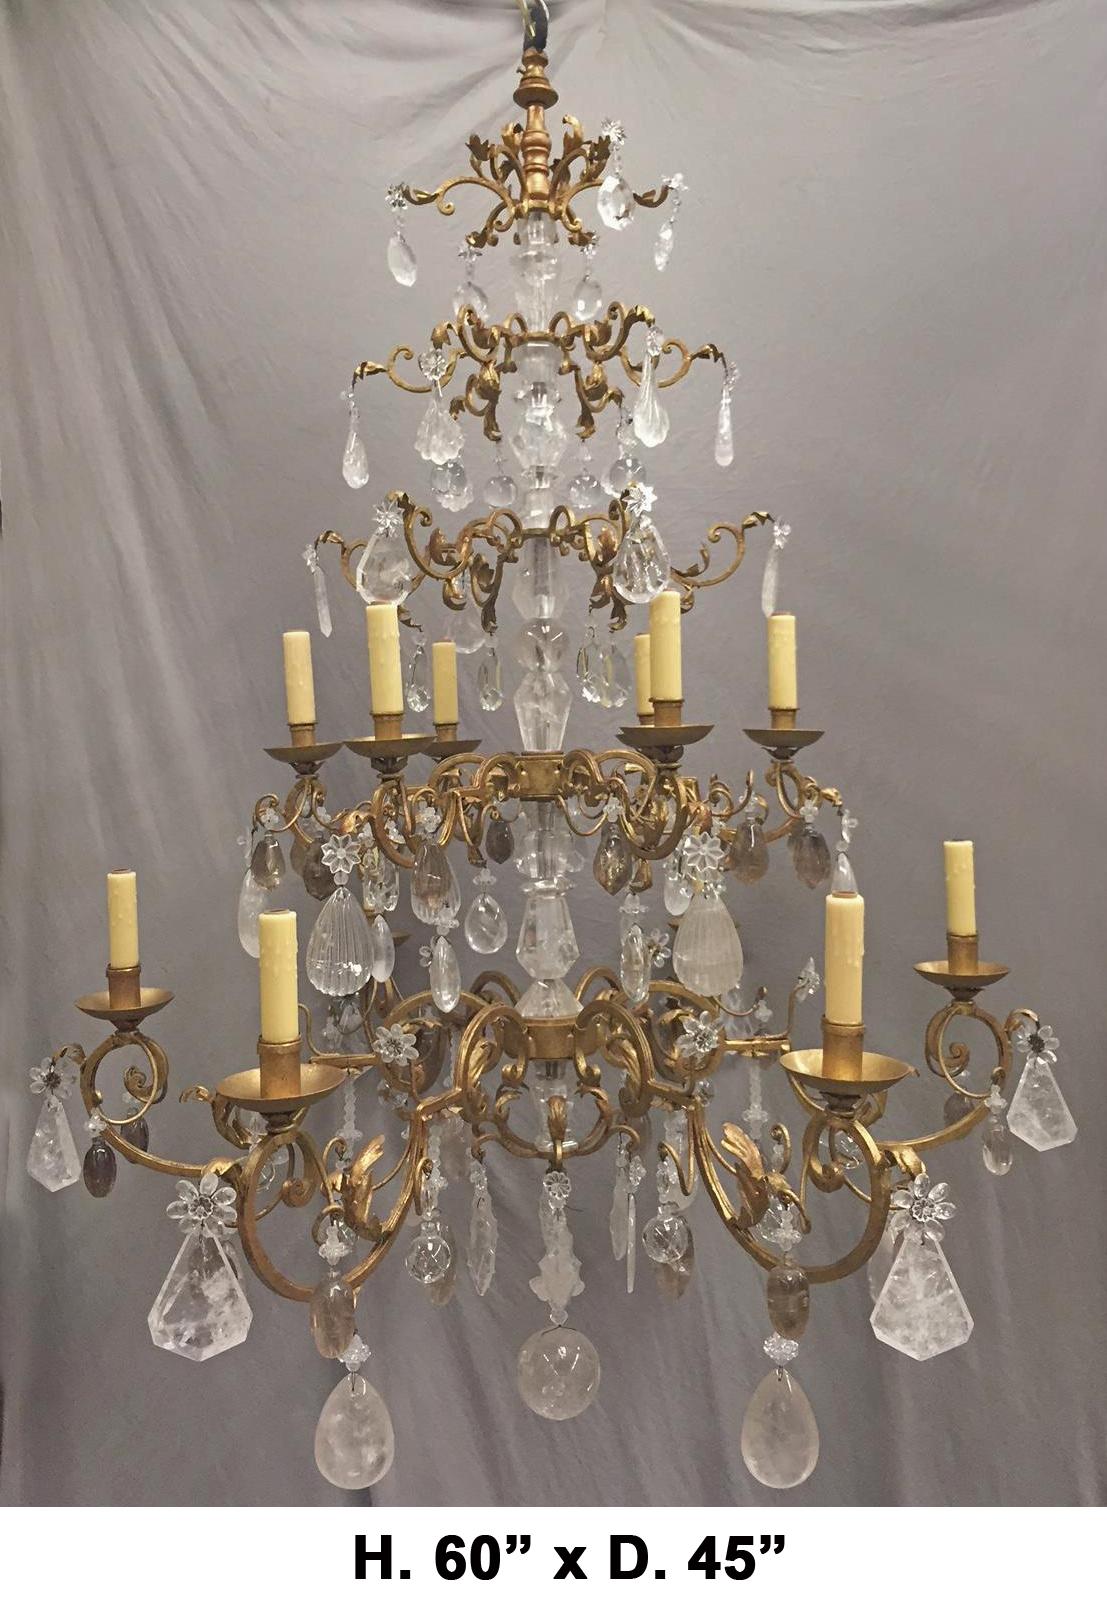 Outstanding hand-carved and polished rock crystal and hand-forged wrought iron two-tier twelve-light chandelier.

The spectacular hand-carved rock crystal center shaft is surrounded by five tiers of finely hand-forged wrought iron foliage motif